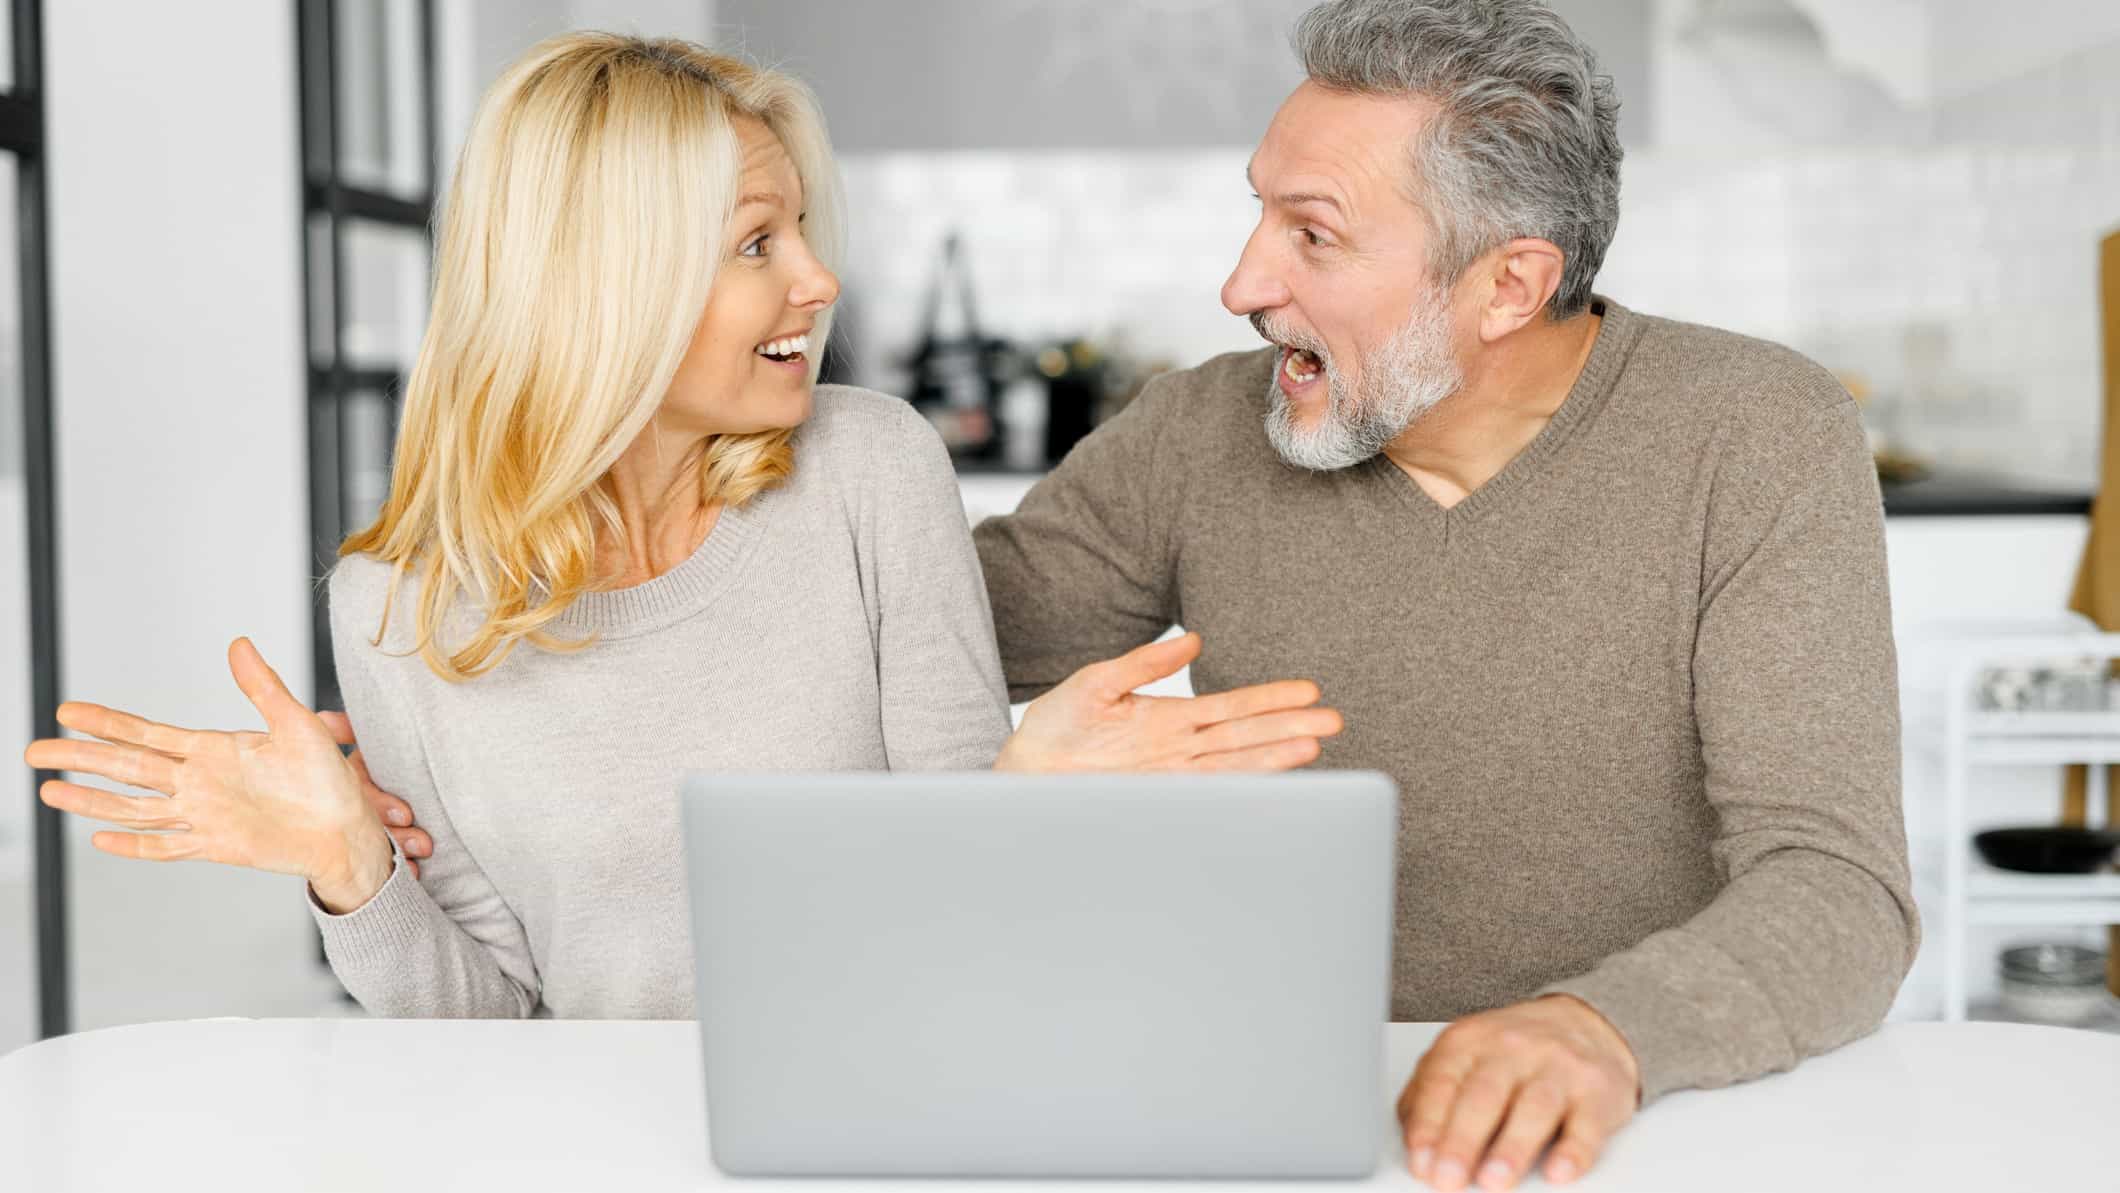 A man and woman sit next to each other looking at each other and feeling excited and surprised after reading good news about their shares on a laptop in front of them